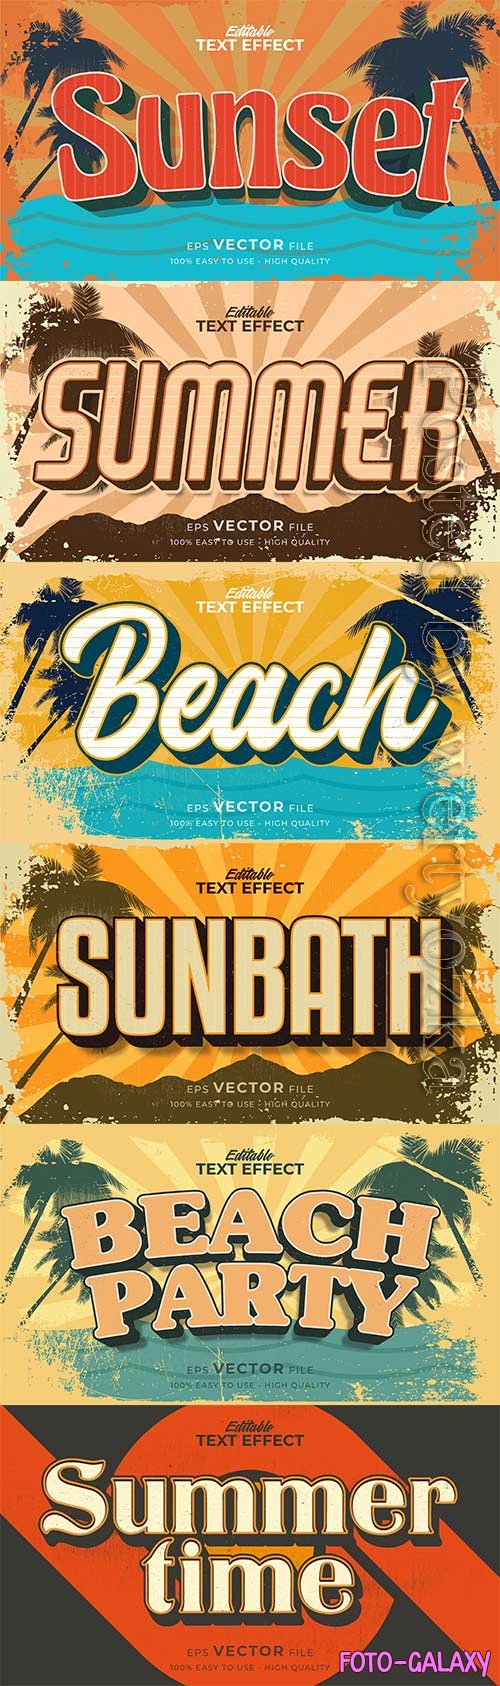 Retro summer holiday text in grunge style theme in vector vol 6